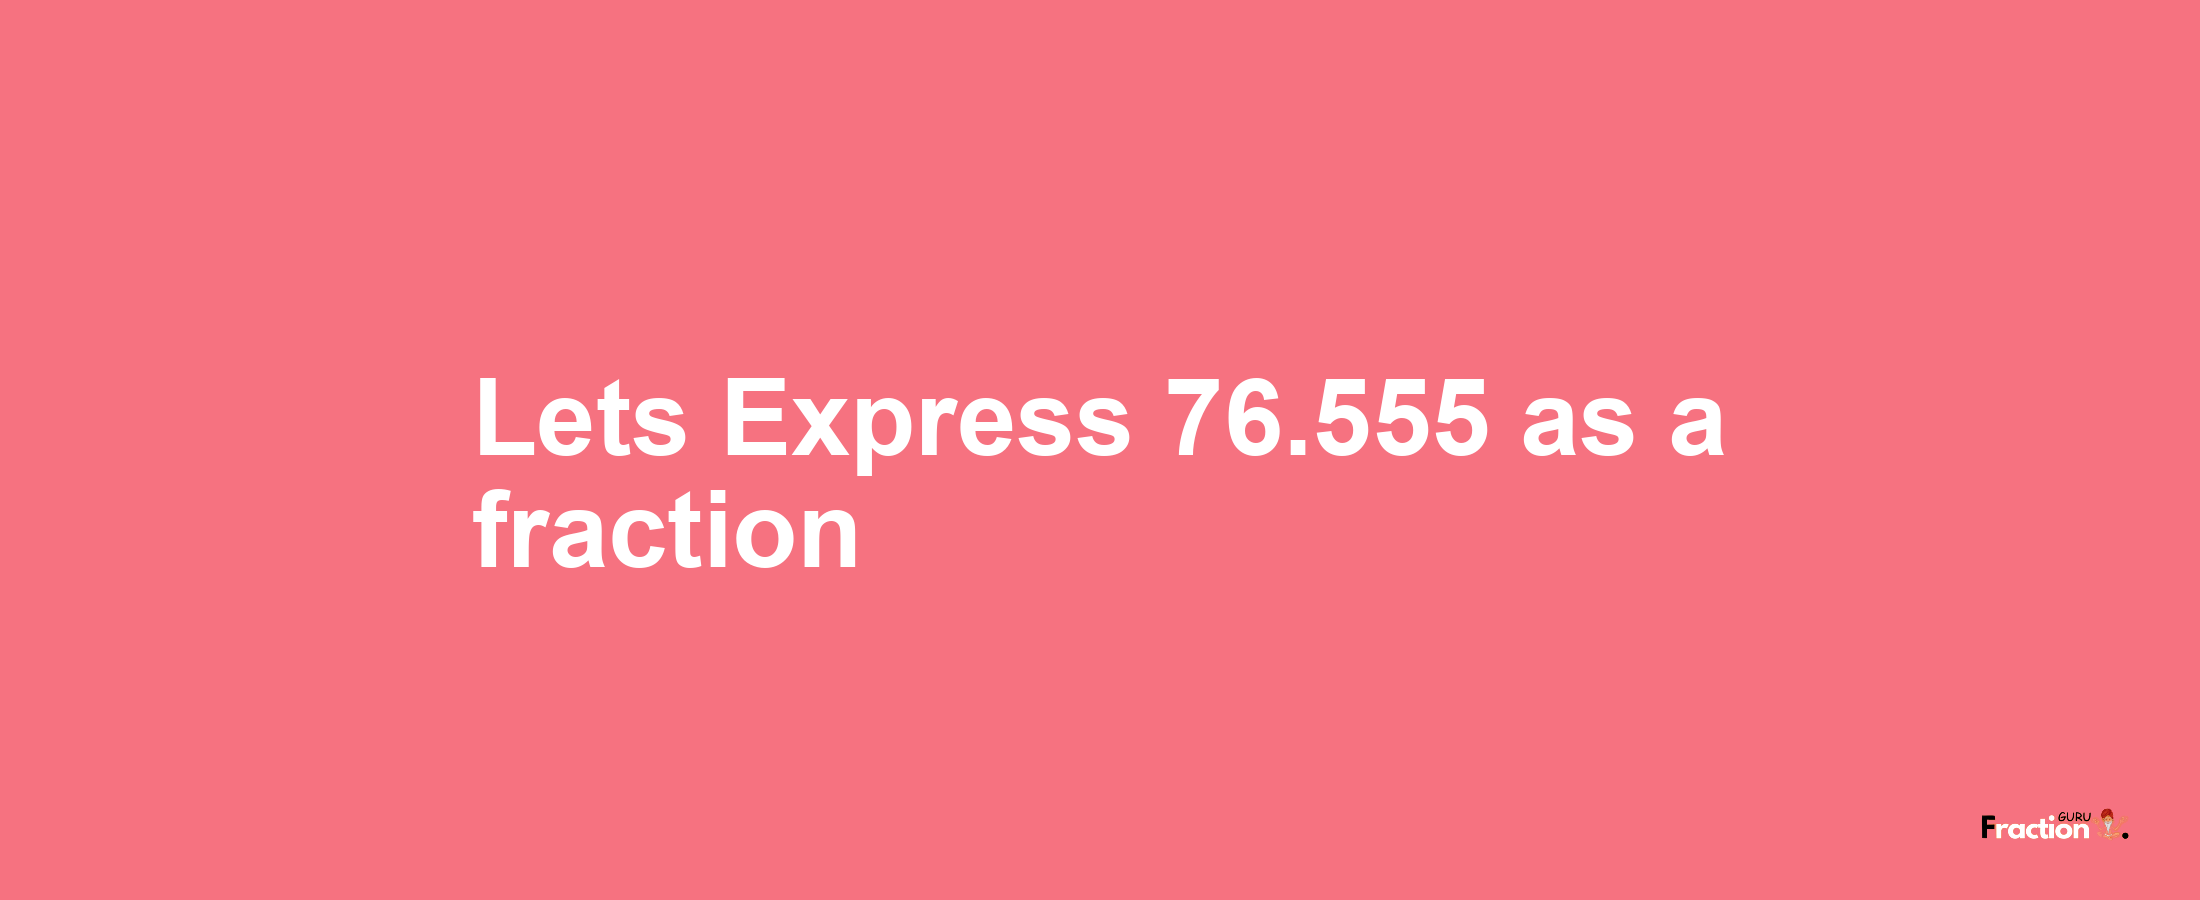 Lets Express 76.555 as afraction